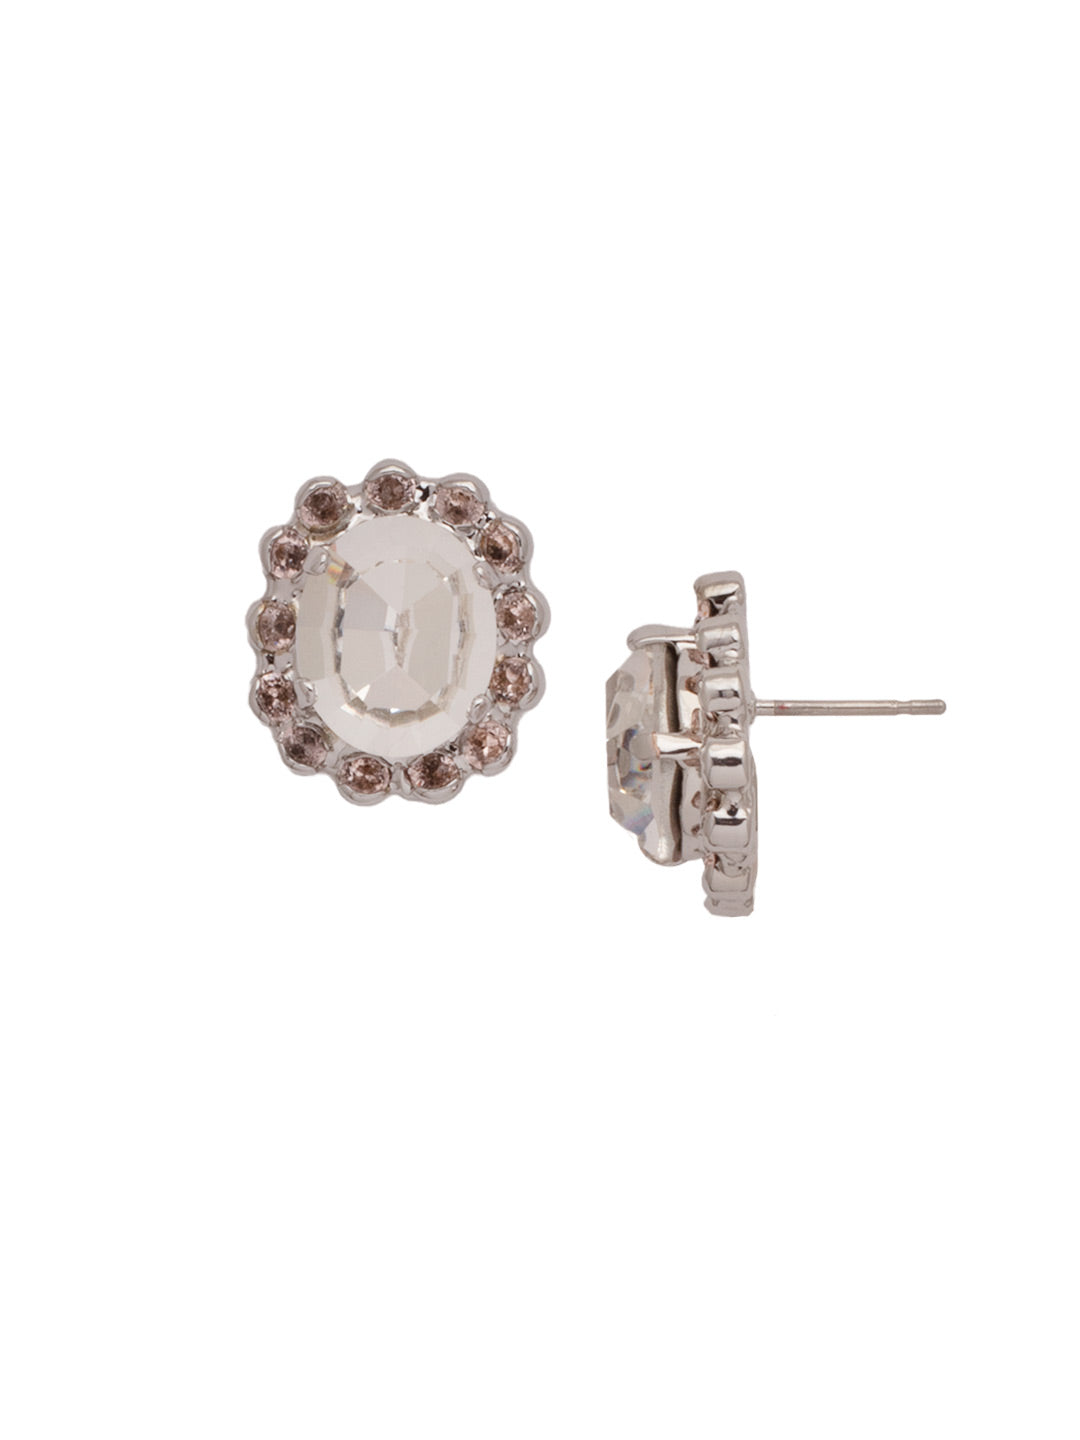 Graycen Round Stud Earring - ECY5PDSNB - <p>The Graycen Round Stud Earrings feature a round halo cut crystal on a post. From Sorrelli's Snow Bunny collection in our Palladium finish.</p>